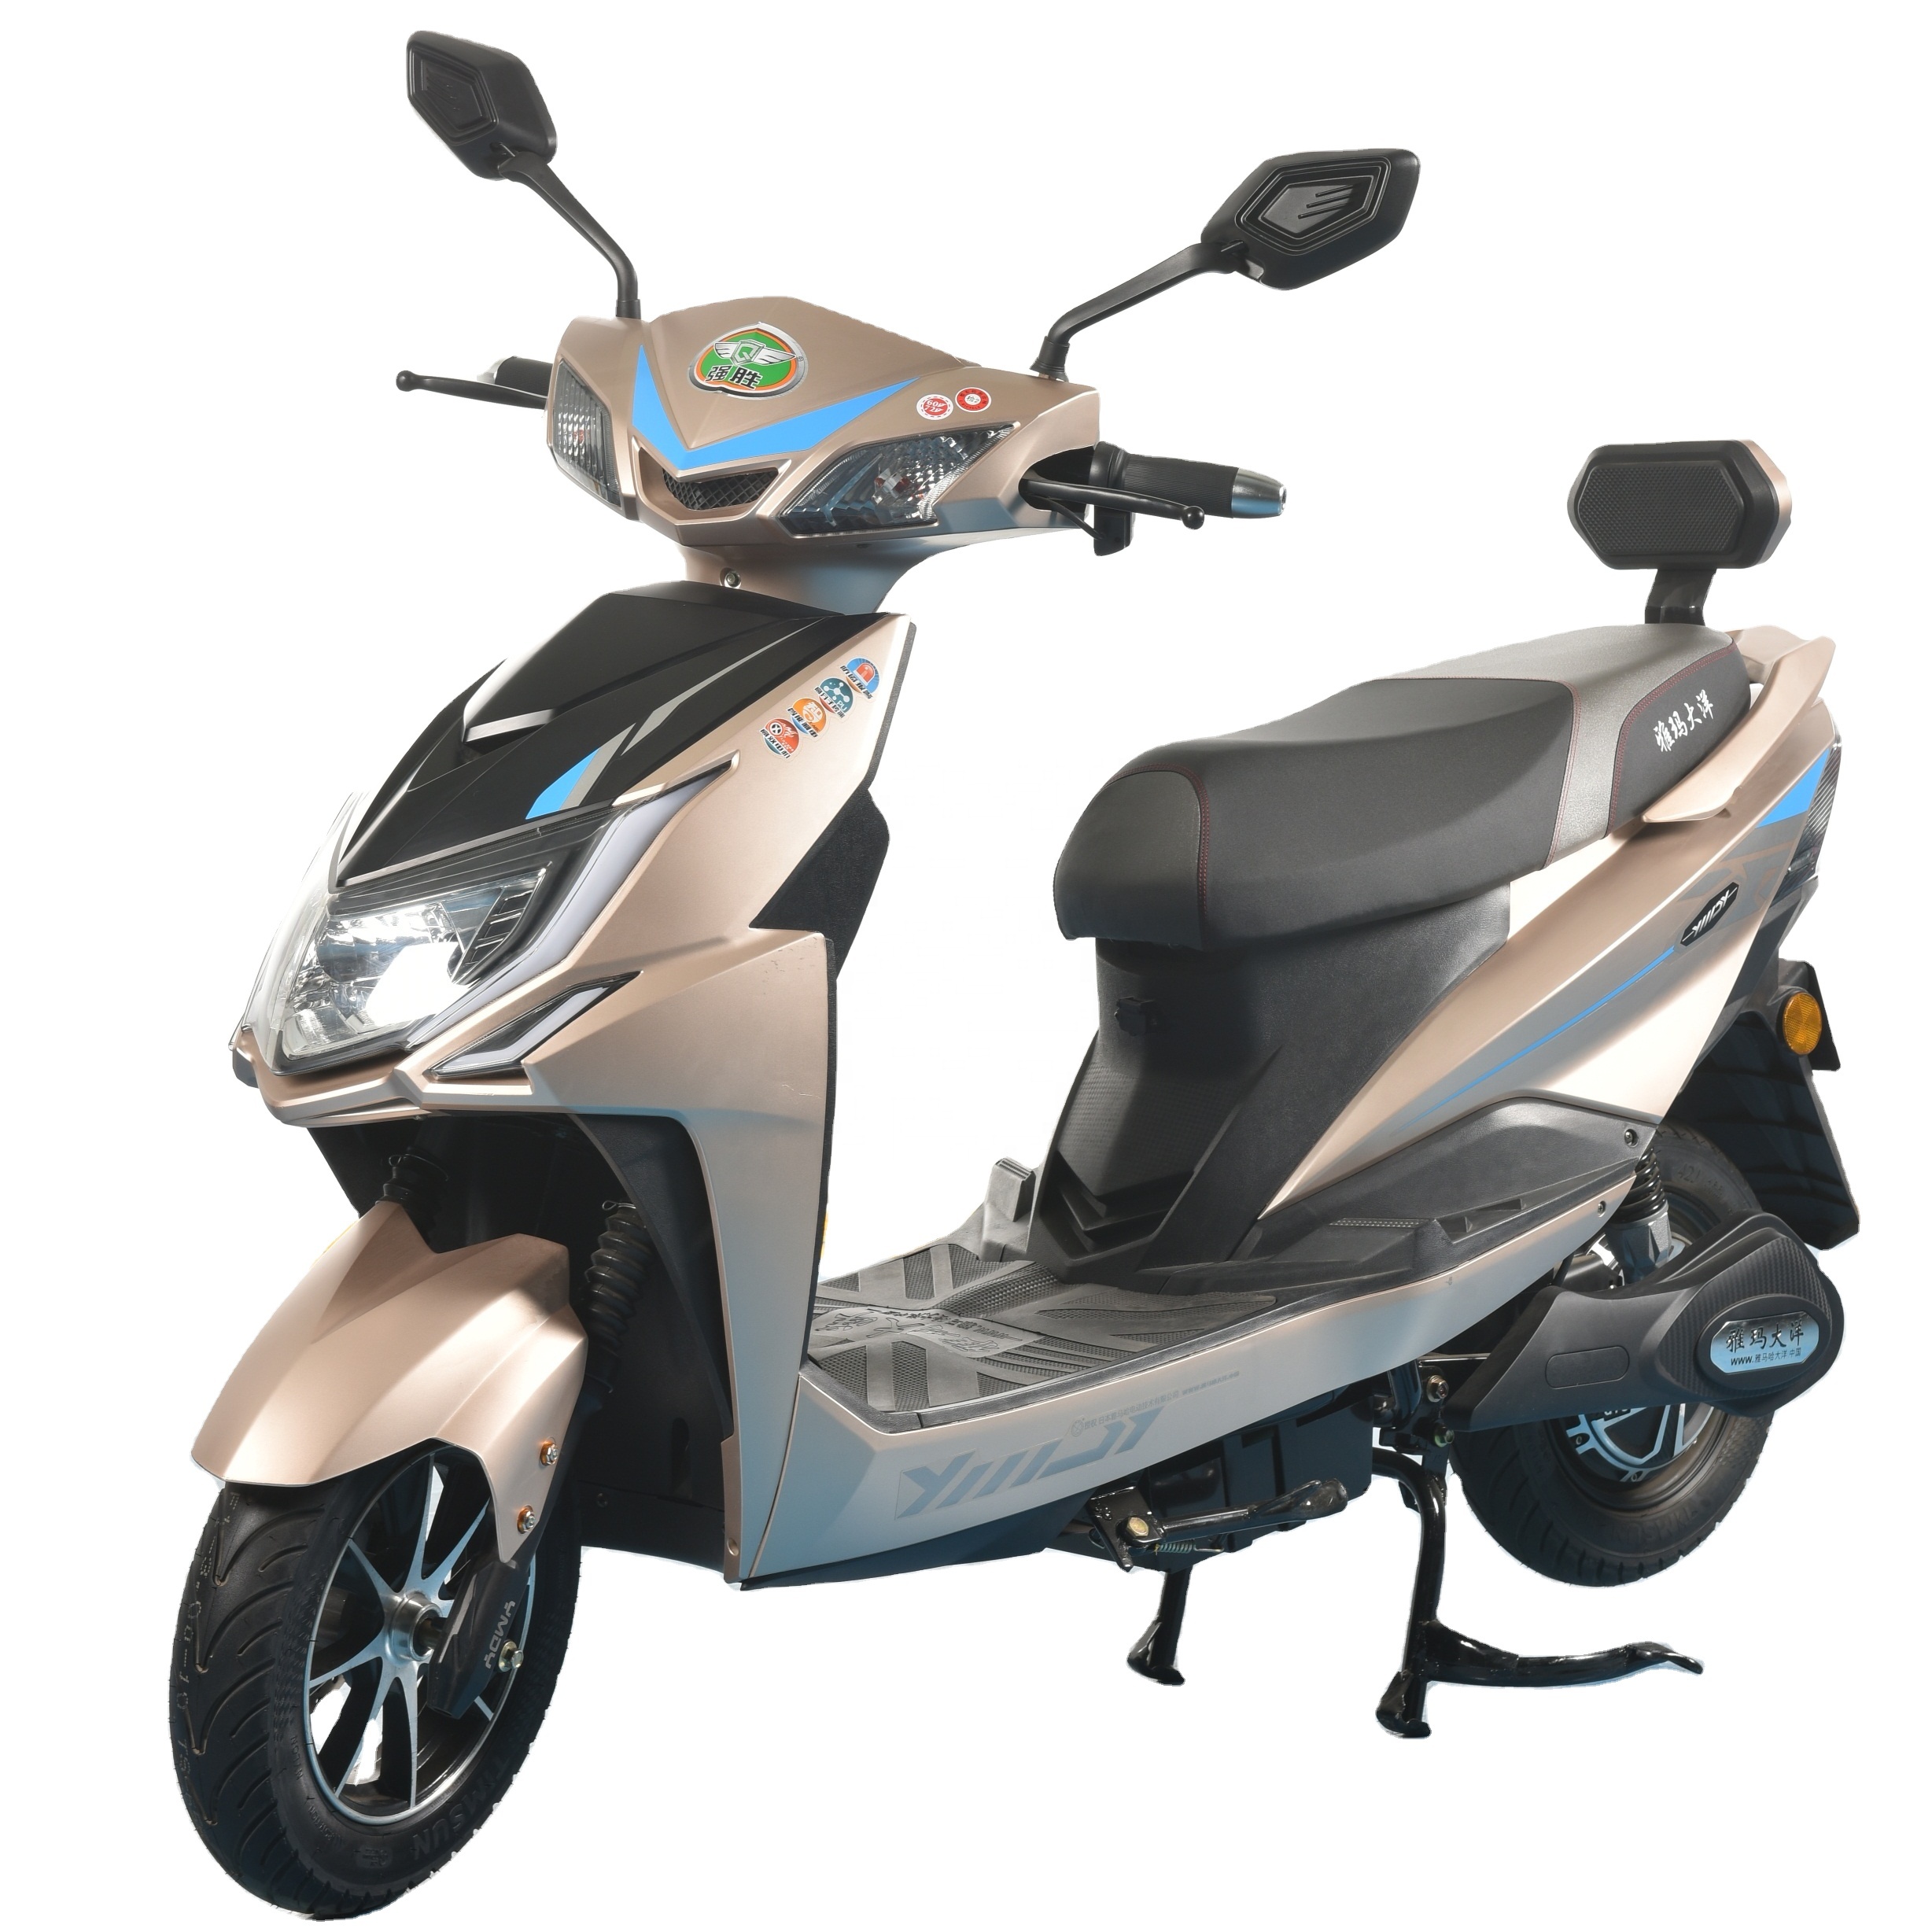 Motorized scooter supplier high power motor motorcycle electric foldable scooter Featured Image